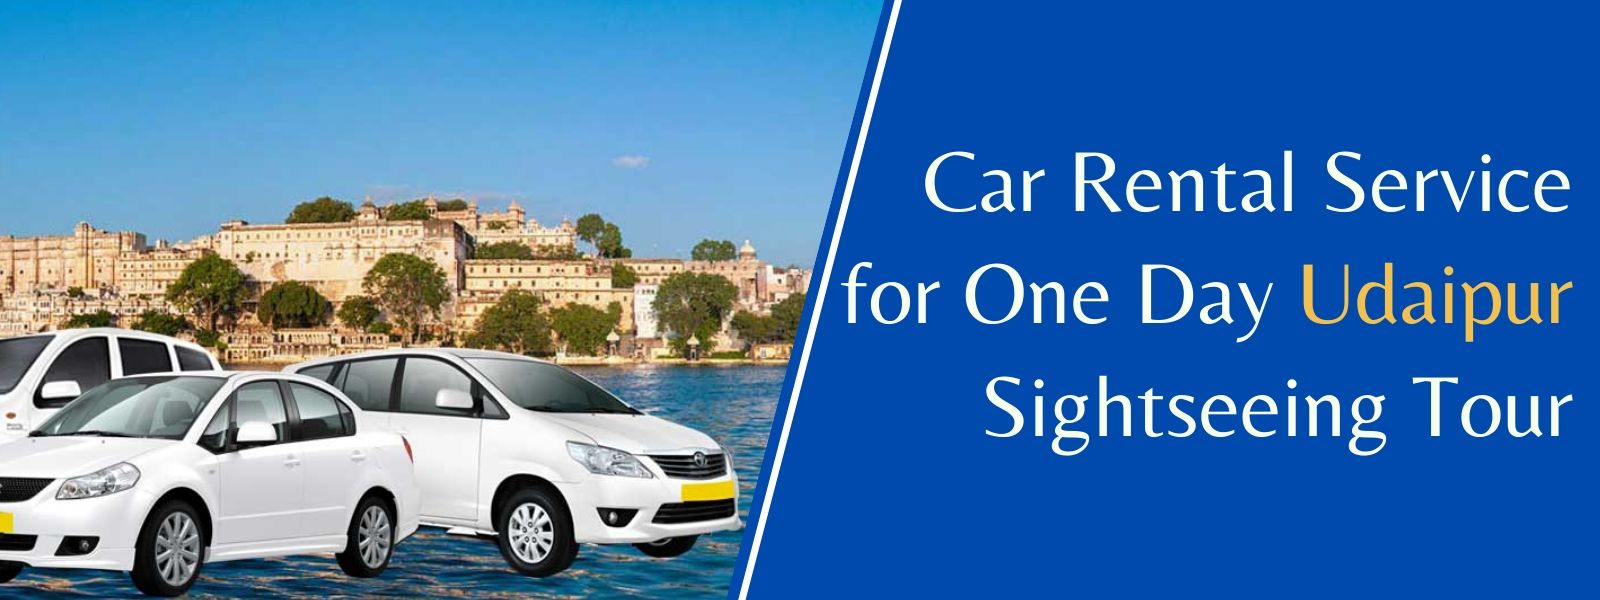 Car Rental Service for One Day Udaipur Sightseeing Tour